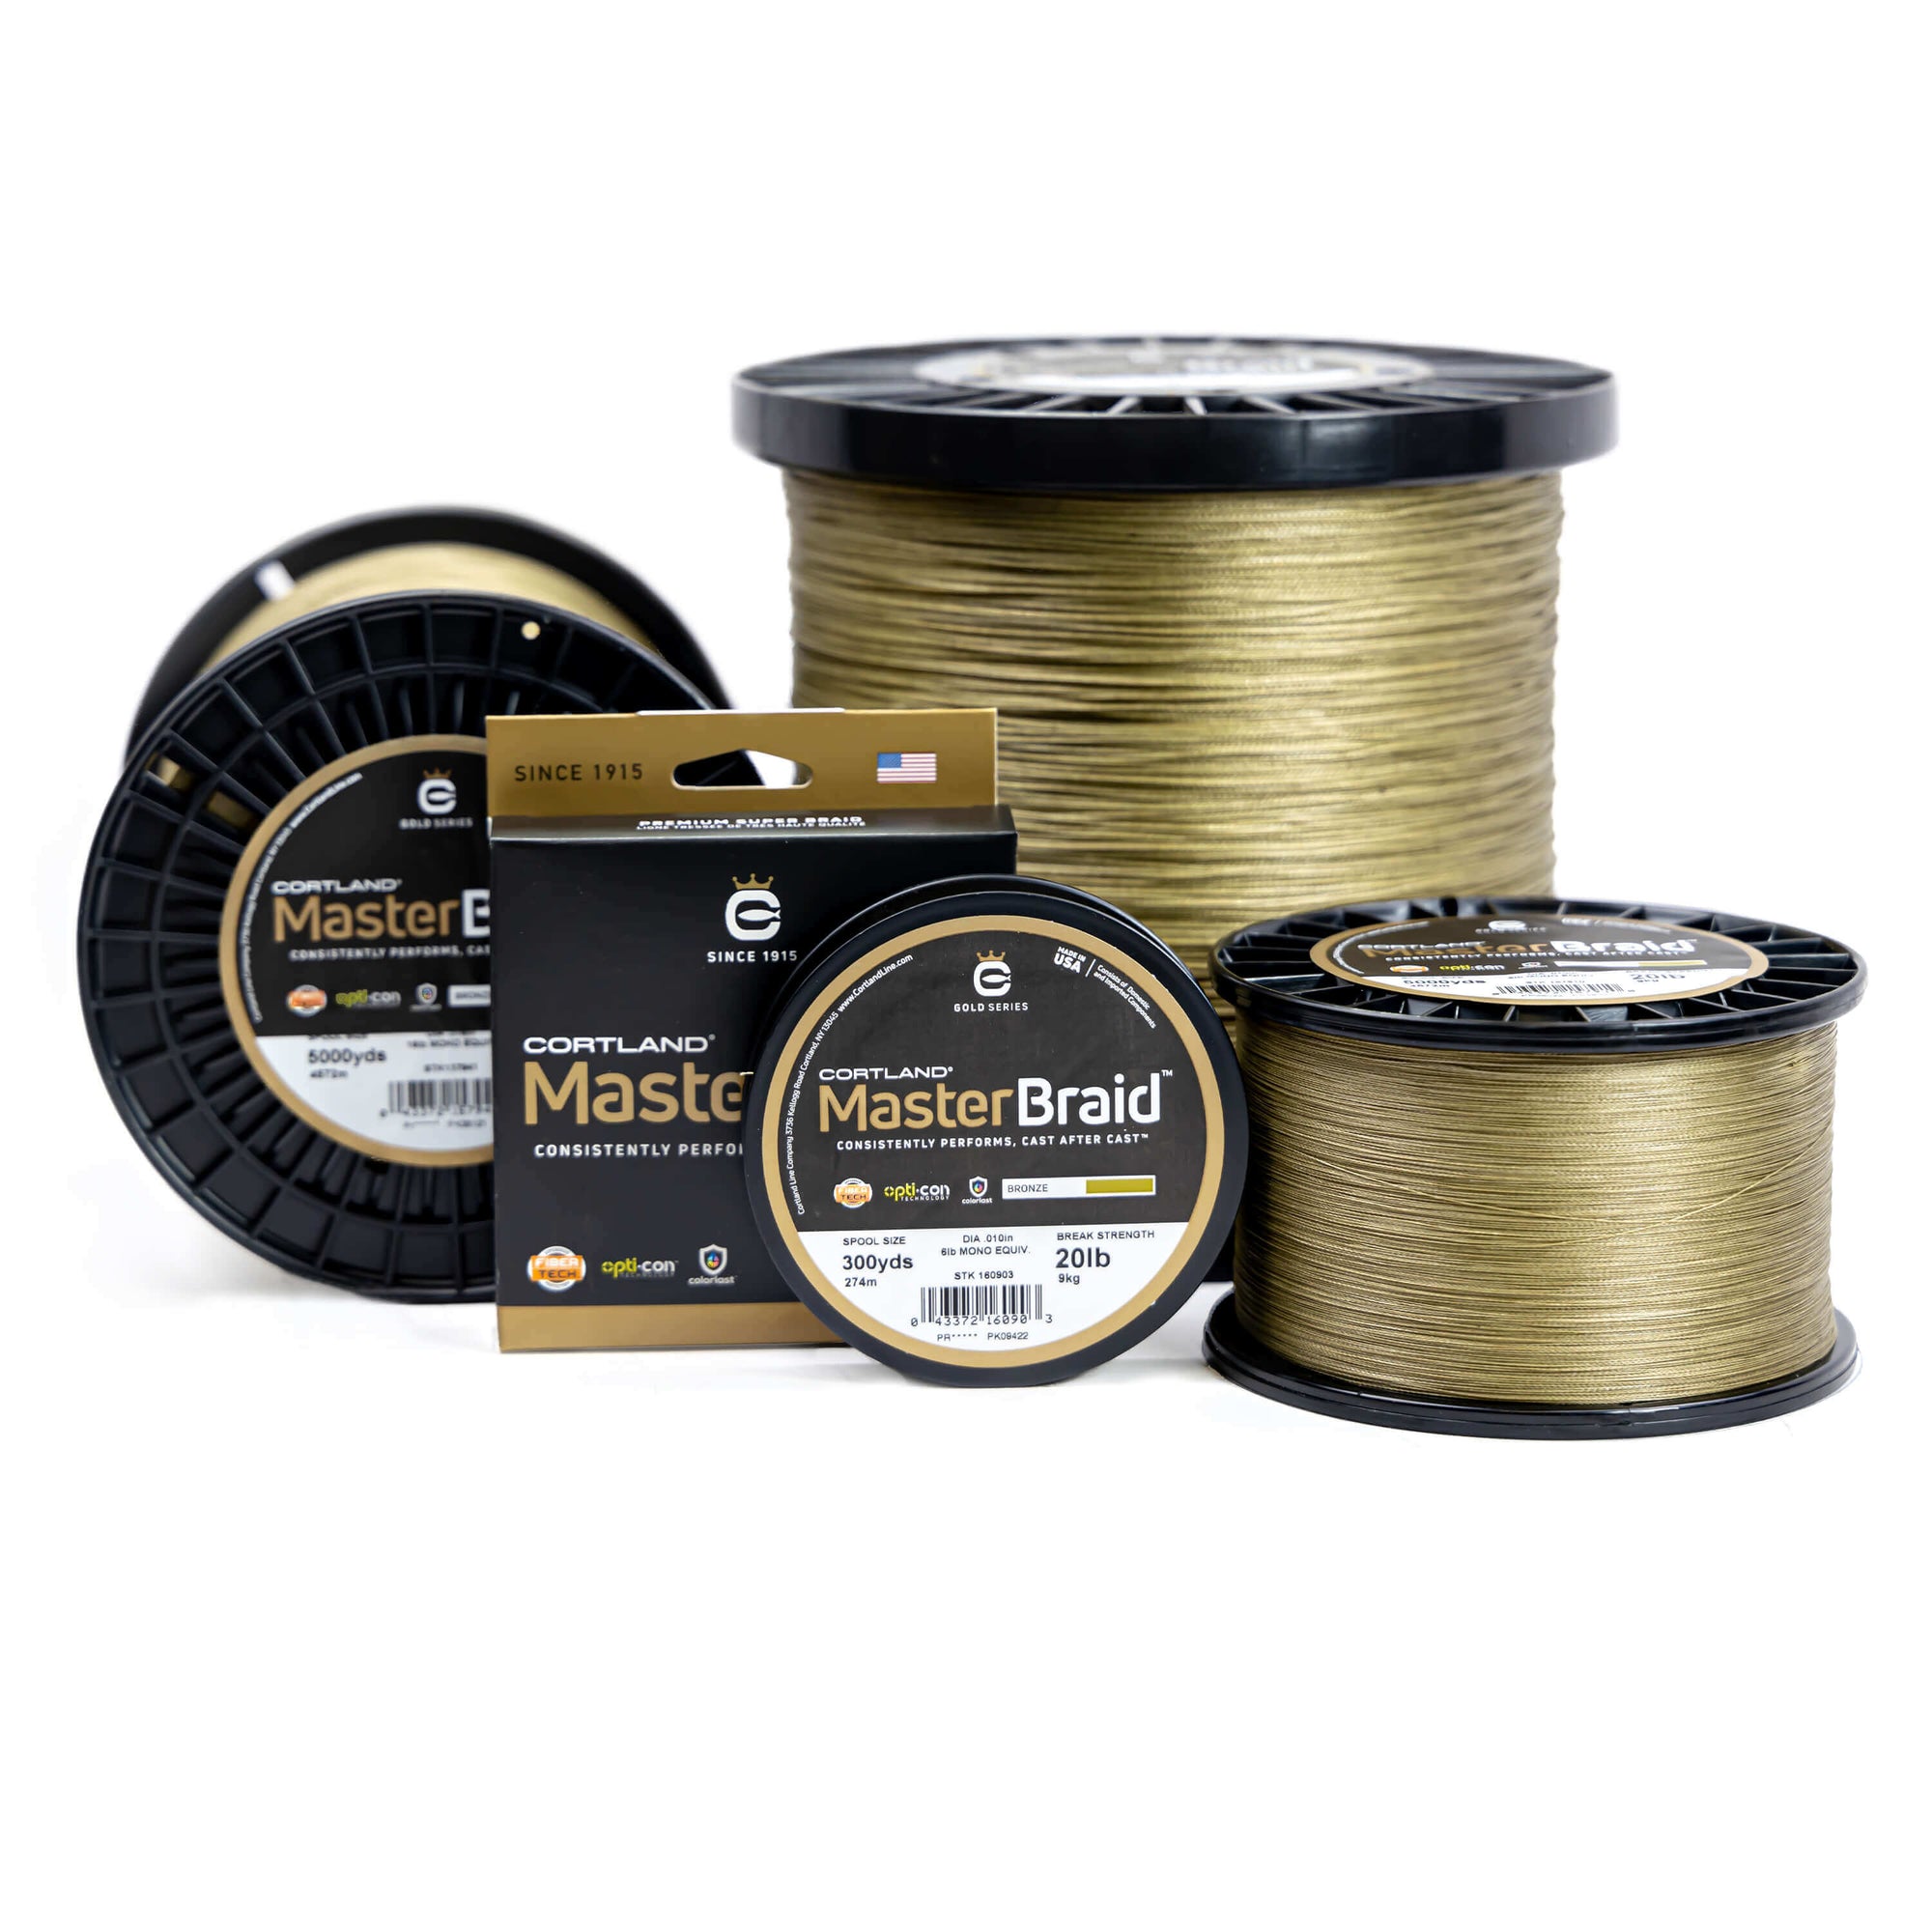 Four Fishing Line Spools and a Collection of Fishing Line